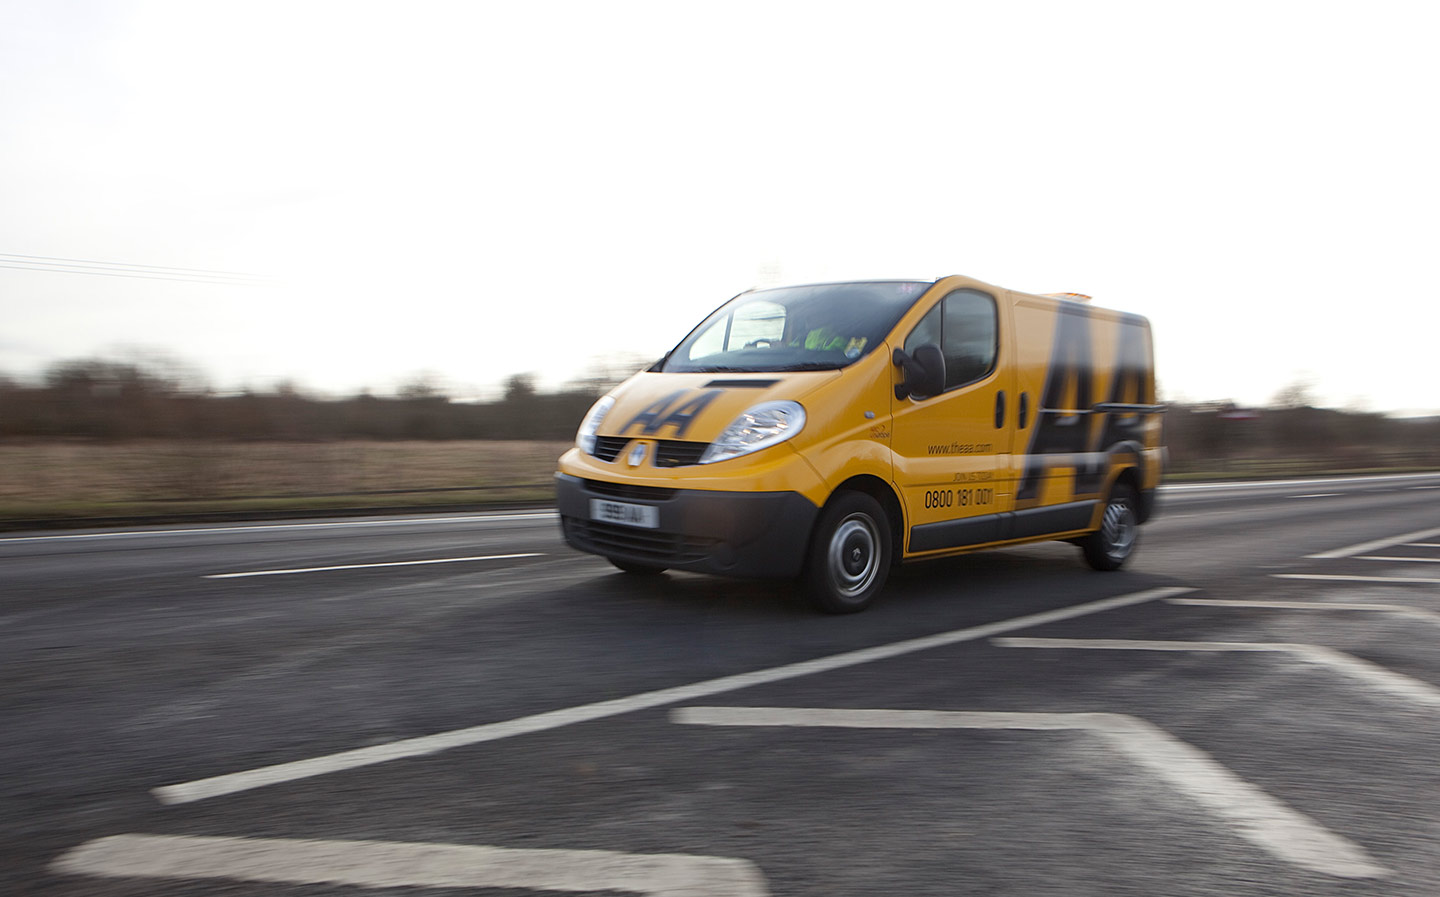 Are the AA and RAC breakdown services working during Covid-19 lockdown?